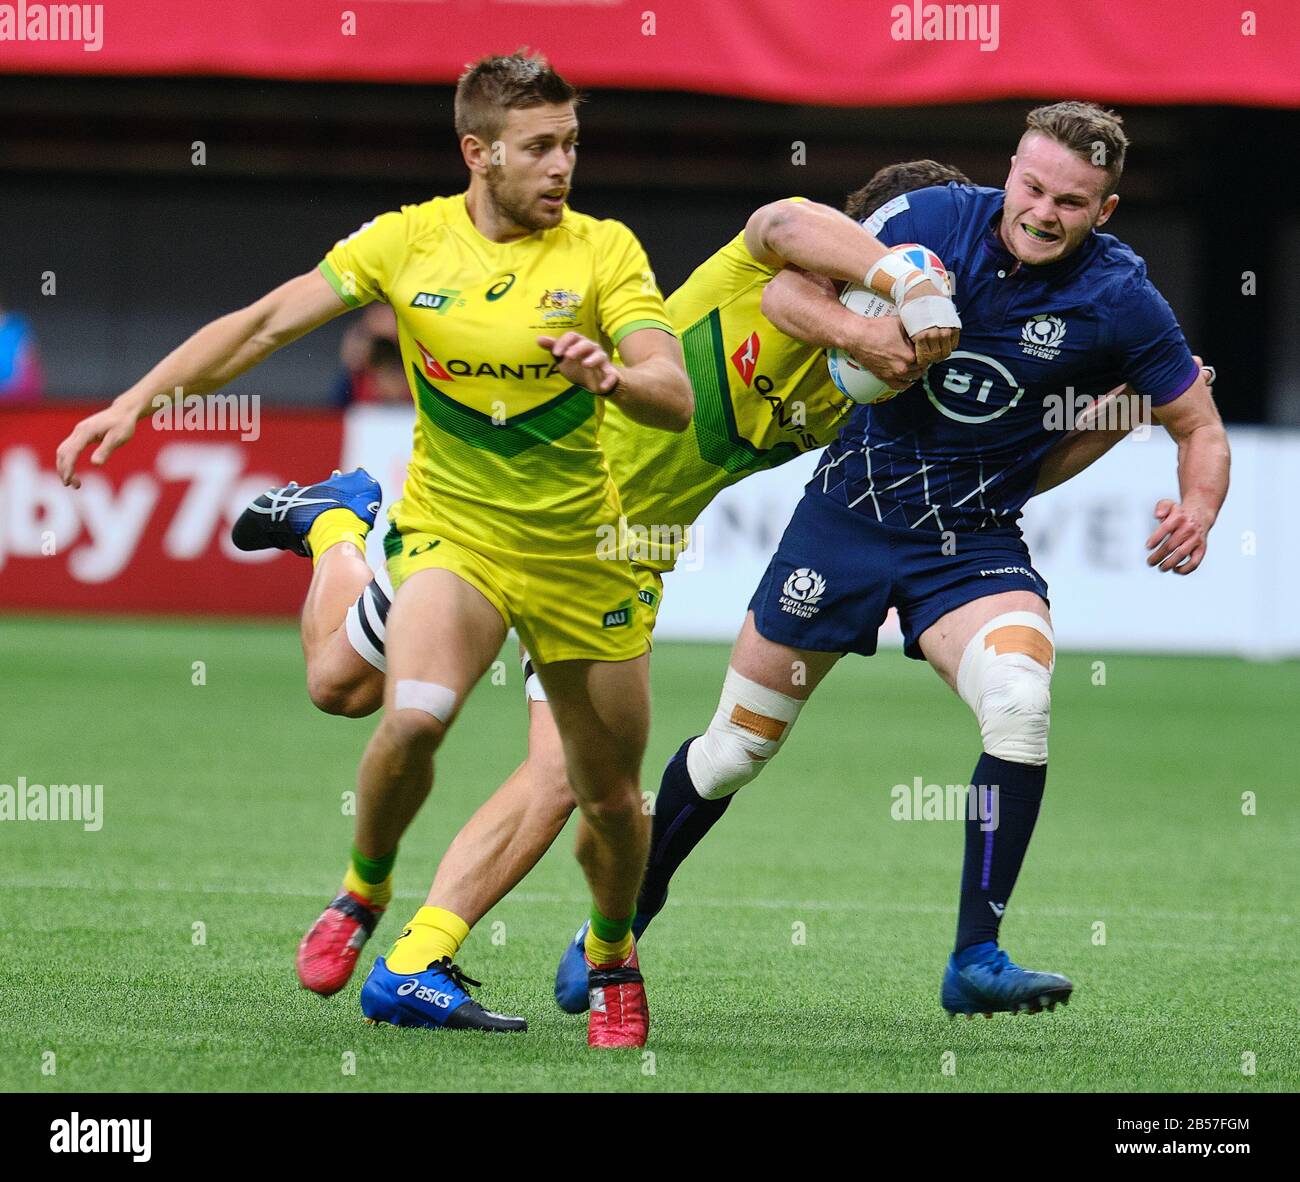 Vancouver, Canada. 7th Mar, 2020. Gavin Lowe #10 of Scotland by Australia players in Match #2 during Day 1 - 2020 HSBC World Rugby Sevens Series at BC Place in Vancouver, Canada. Credit: Joe Ng/Alamy Live News Stock Photo